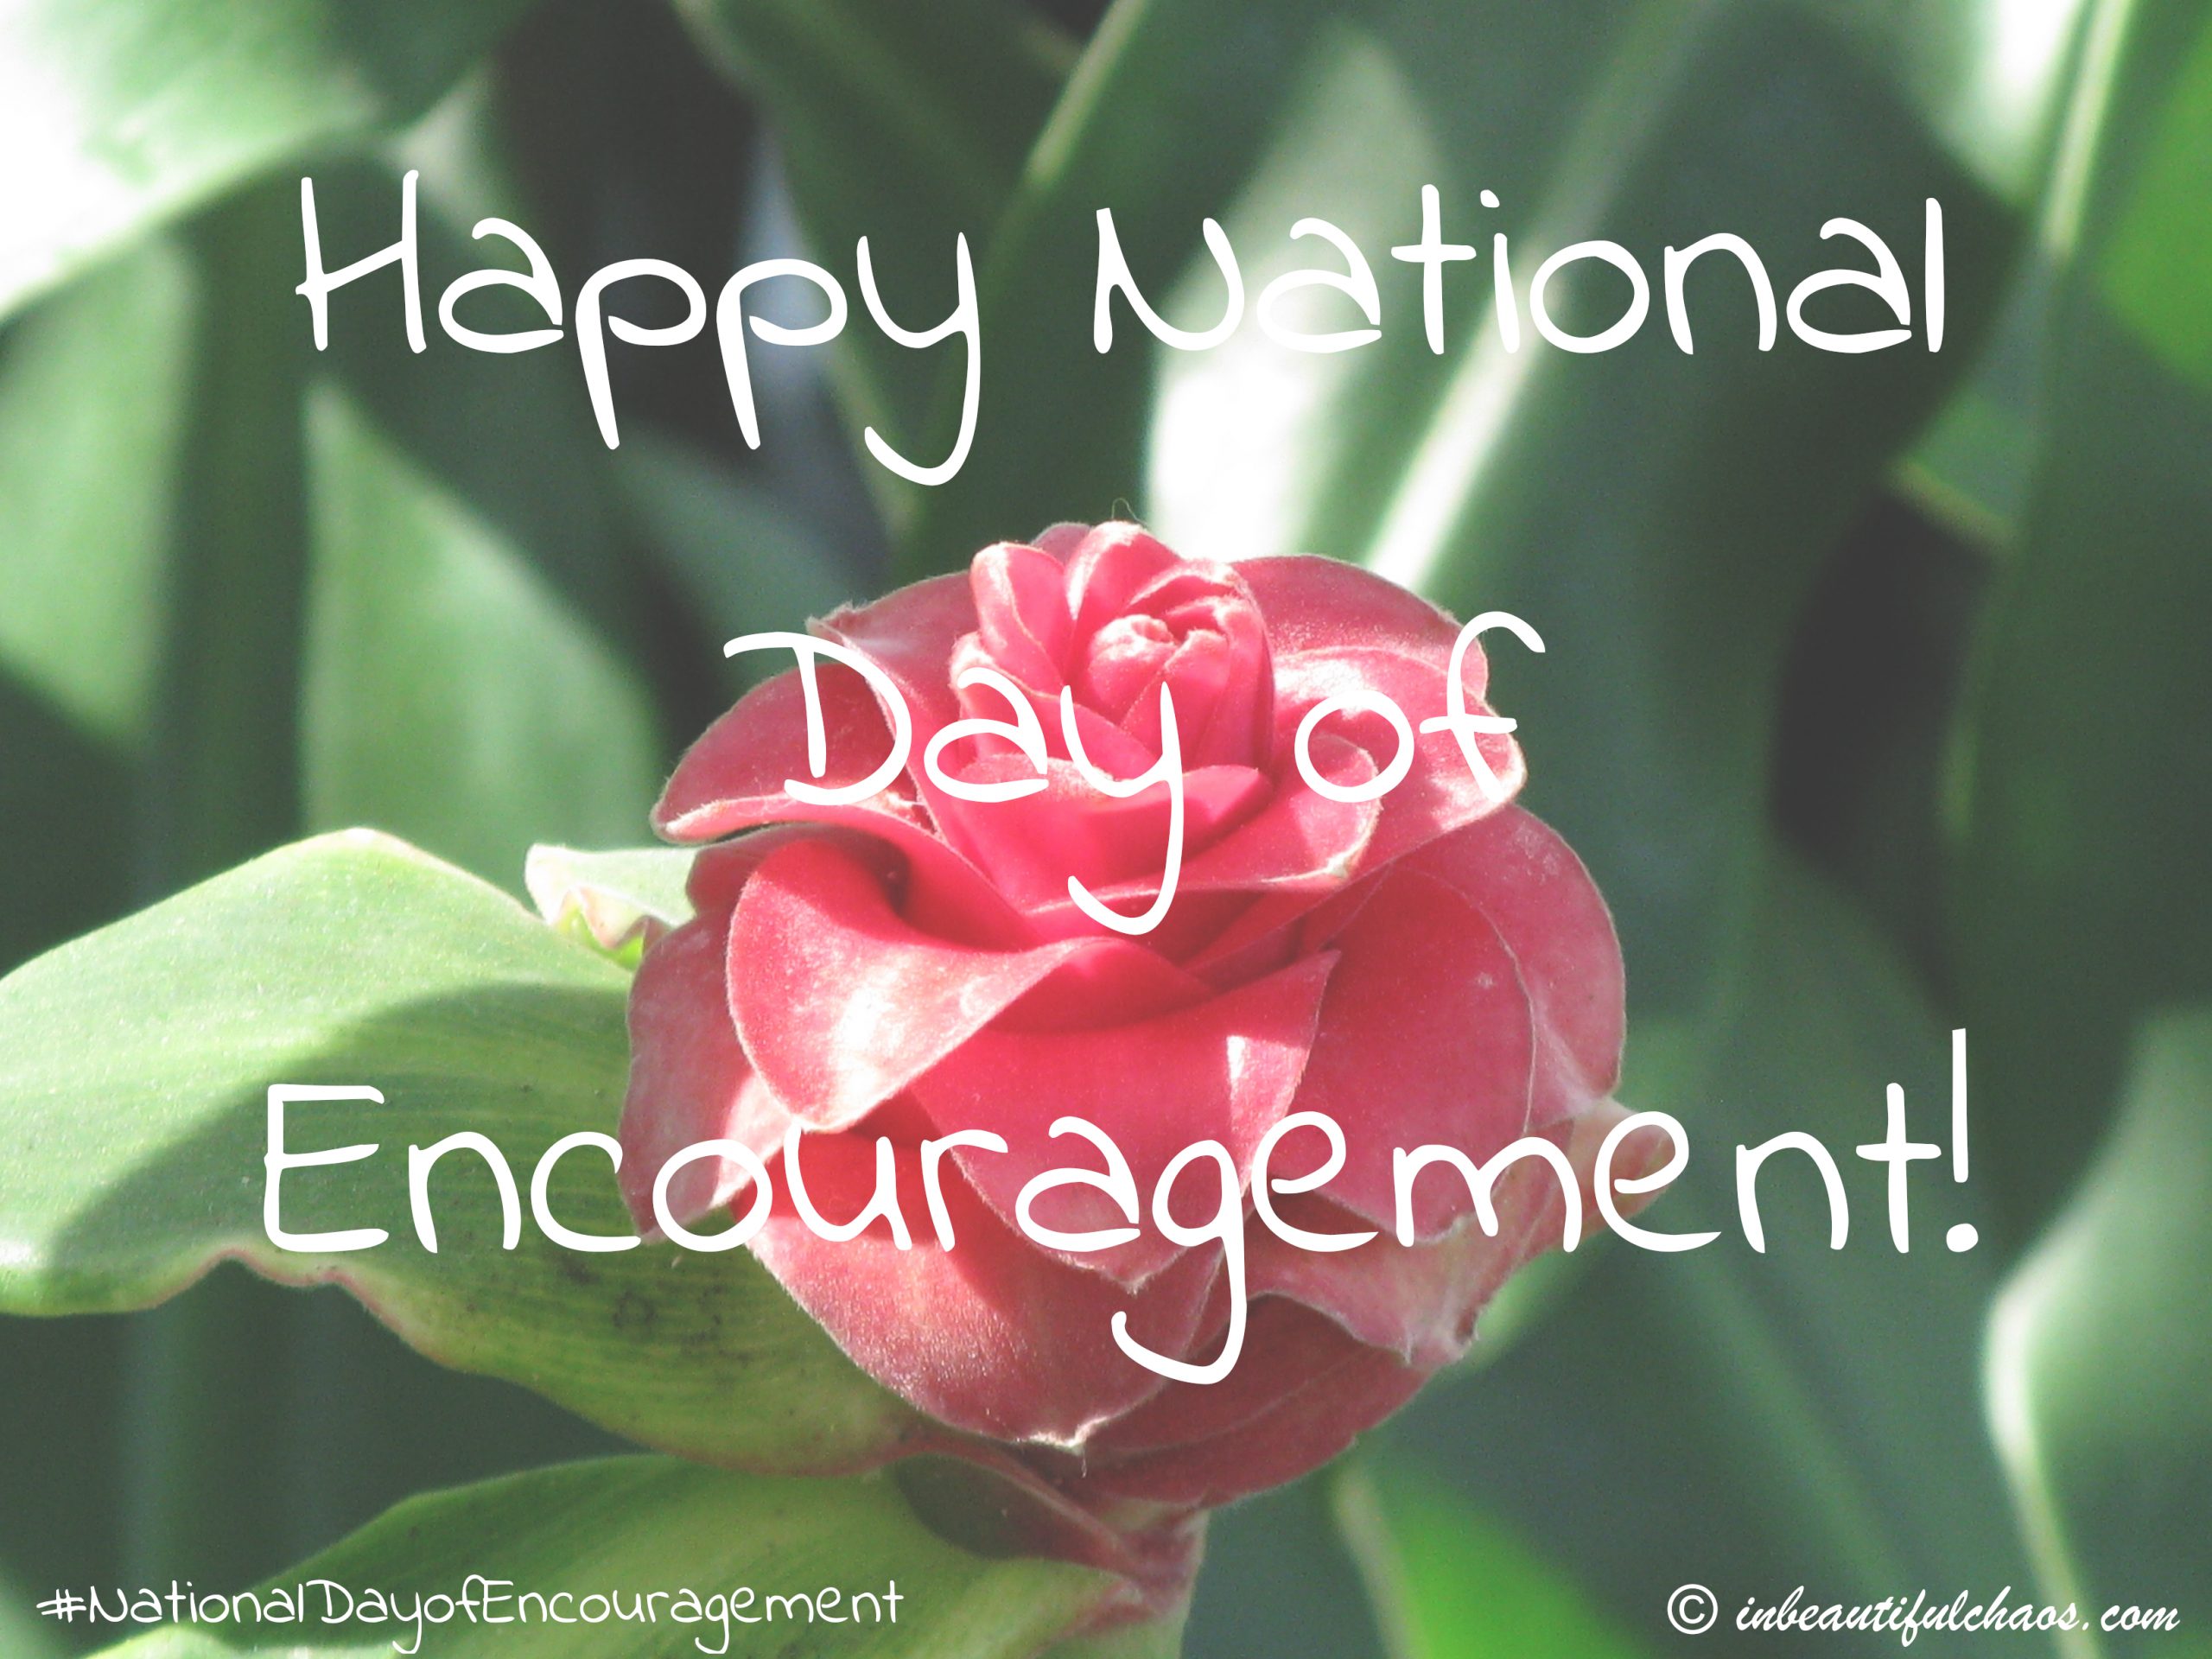 Happy National Day of Encouragement! In Beautiful Chaos